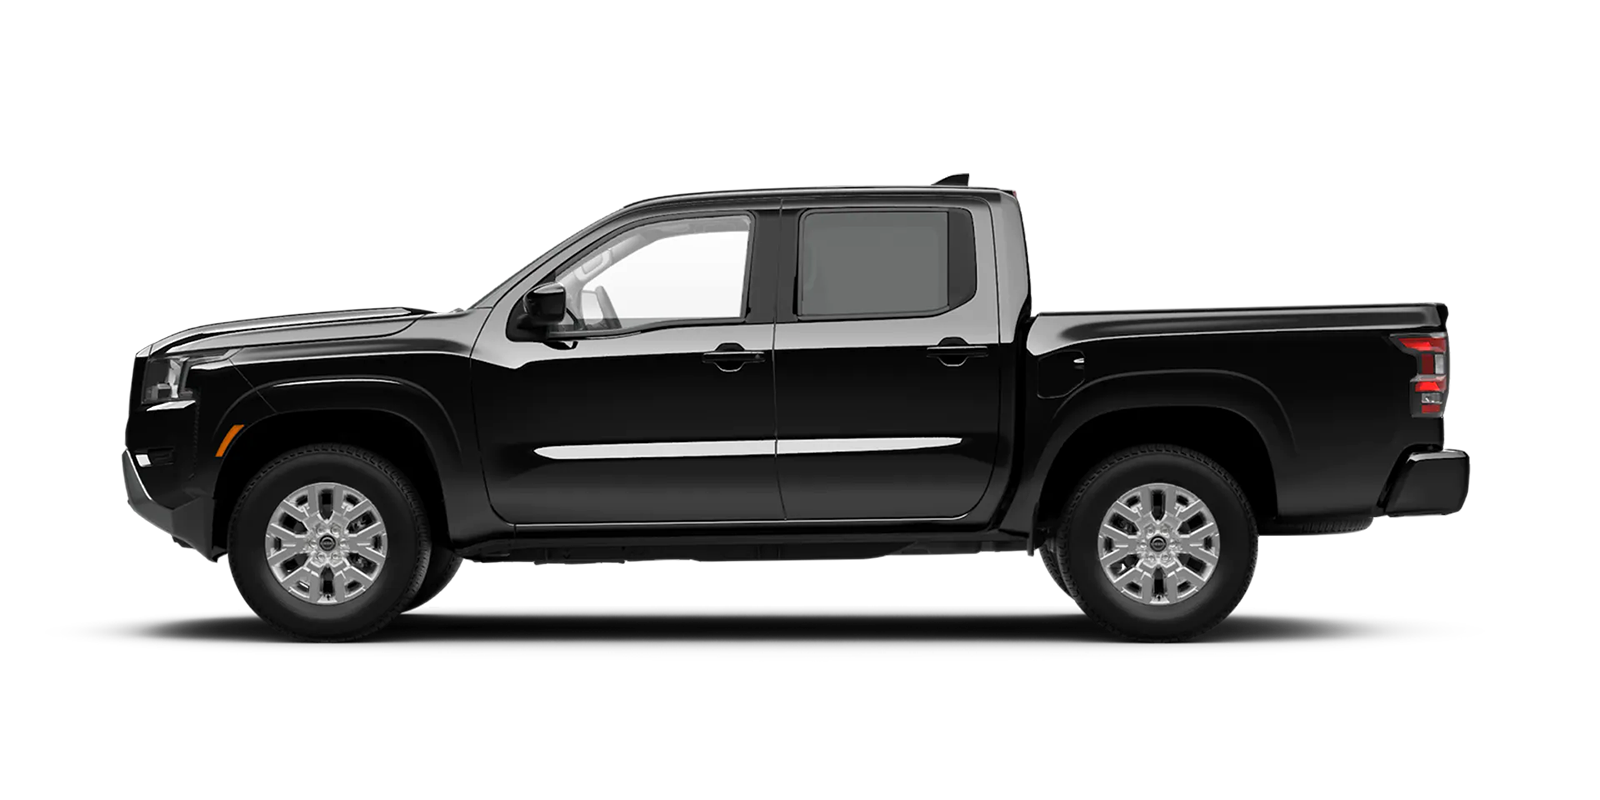 2022 Frontier Crew Cab SV 4x2 in Super Black | Courtesy Nissan PA in Altoona PA